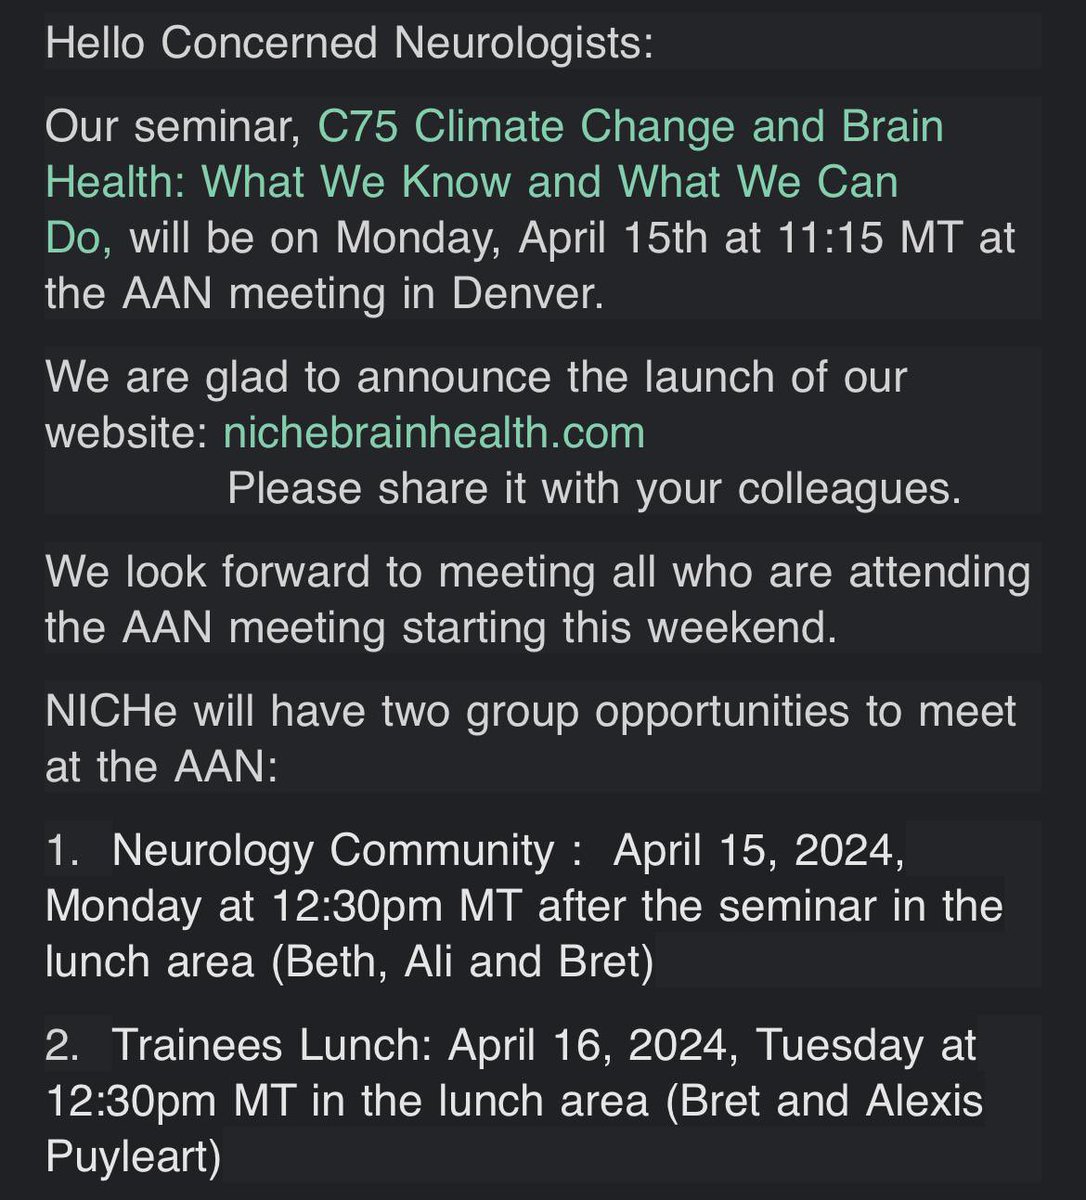 Don’t forget to join the climate change and brain health course at #AANAM! Happening at C75 11:15 MT RM 102! #Neurology #ClimateAction #SIGN #neurotwitter #MedTwitter #globalhealth